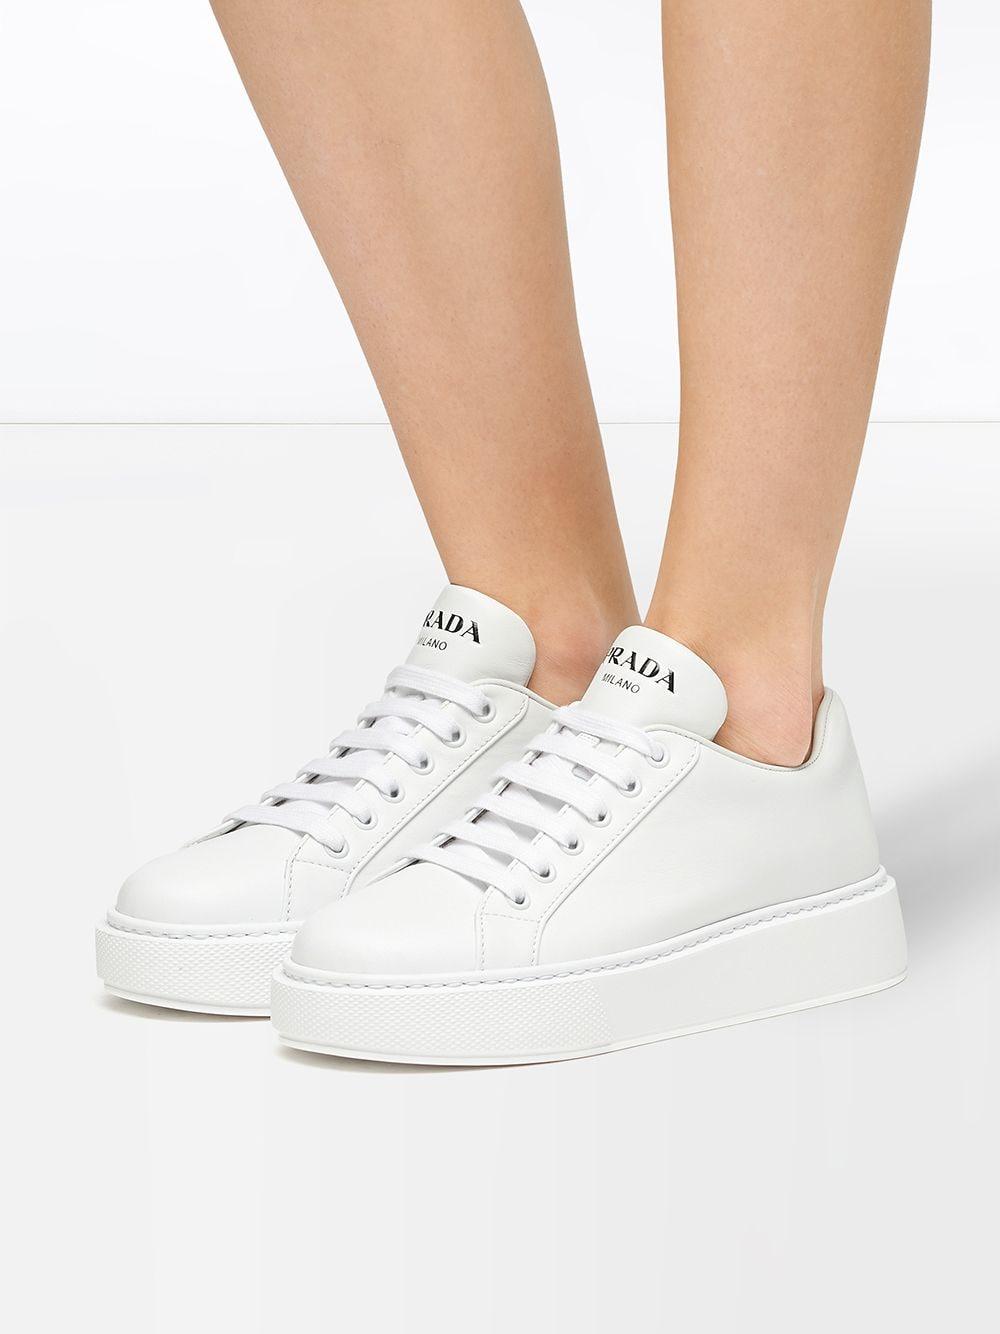 White Sneakers For Women - Buy White Sneakers For Women online in India